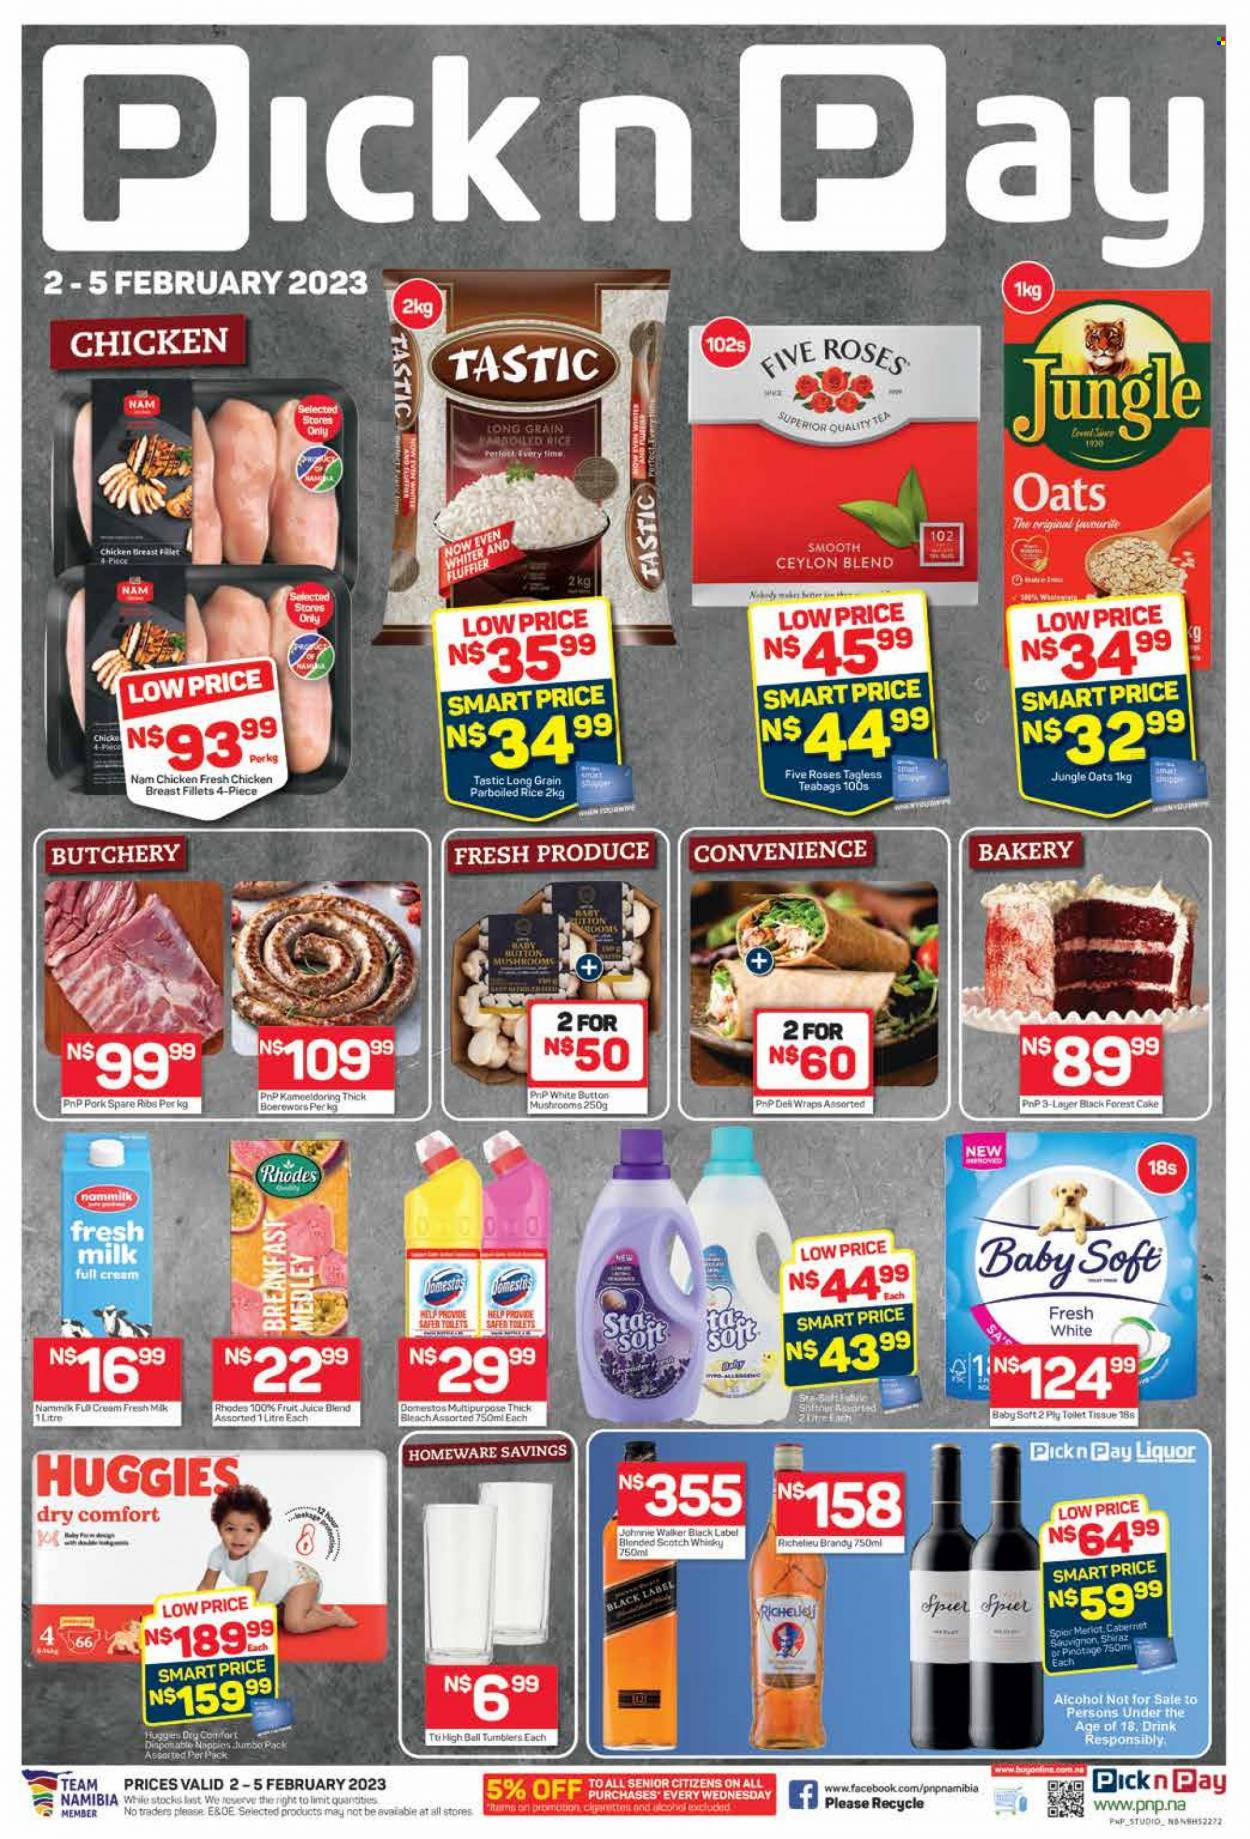 thumbnail - Pick n Pay catalogue  - 02/02/2023 - 05/02/2023 - Sales products - mushrooms, cake, wraps, milk, oats, jungle oats, rice, parboiled rice, Tastic, fruit juice, juice, tea, tea bags, Cabernet Sauvignon, red wine, wine, Merlot, alcohol, Shiraz, brandy, liquor, Johnnie Walker, Richelieu, scotch whisky, whisky, chicken breasts, ribs, pork meat, pork ribs, pork spare ribs, Huggies, Baby Soft, Domestos, bleach, thick bleach, braai wors. Page 1.